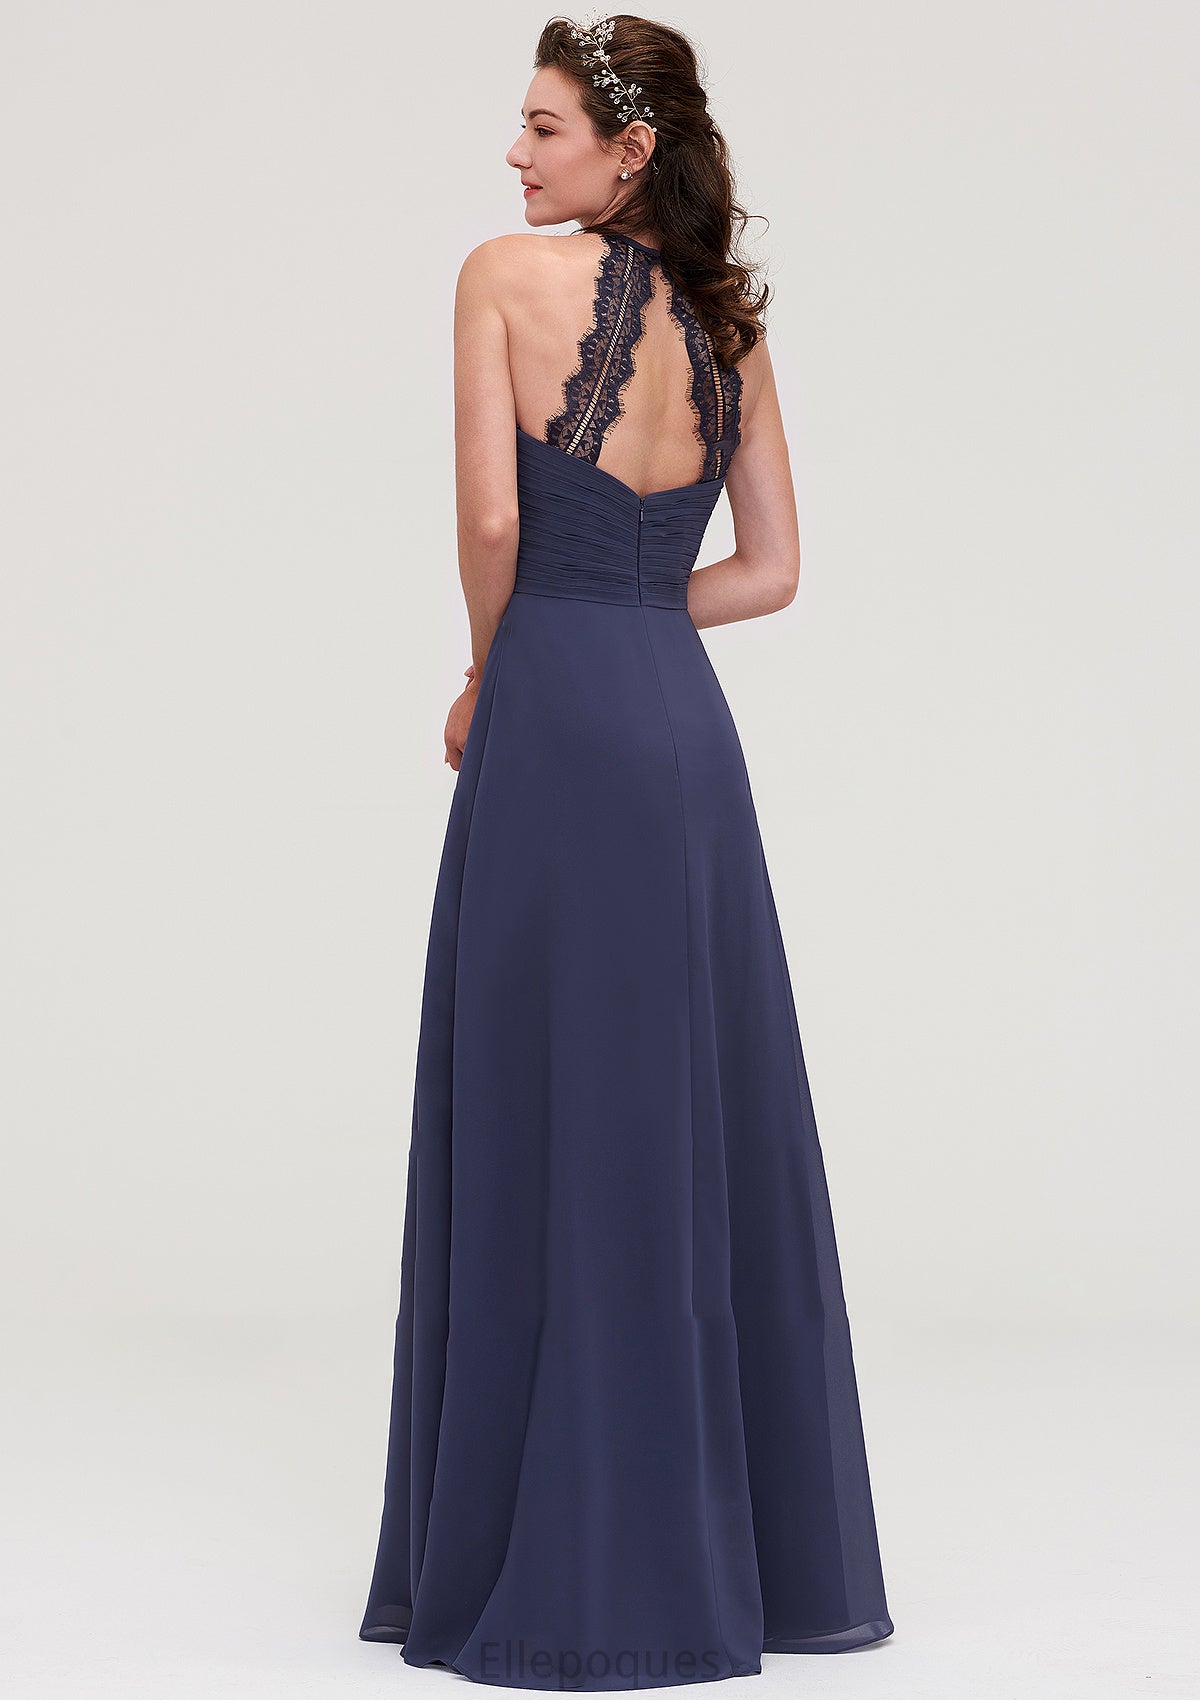 Scoop Neck Sleeveless A-line/Princess Chiffon Long/Floor-Length Bridesmaid Dresseses With Pleated Appliqued Shania HOP0025439